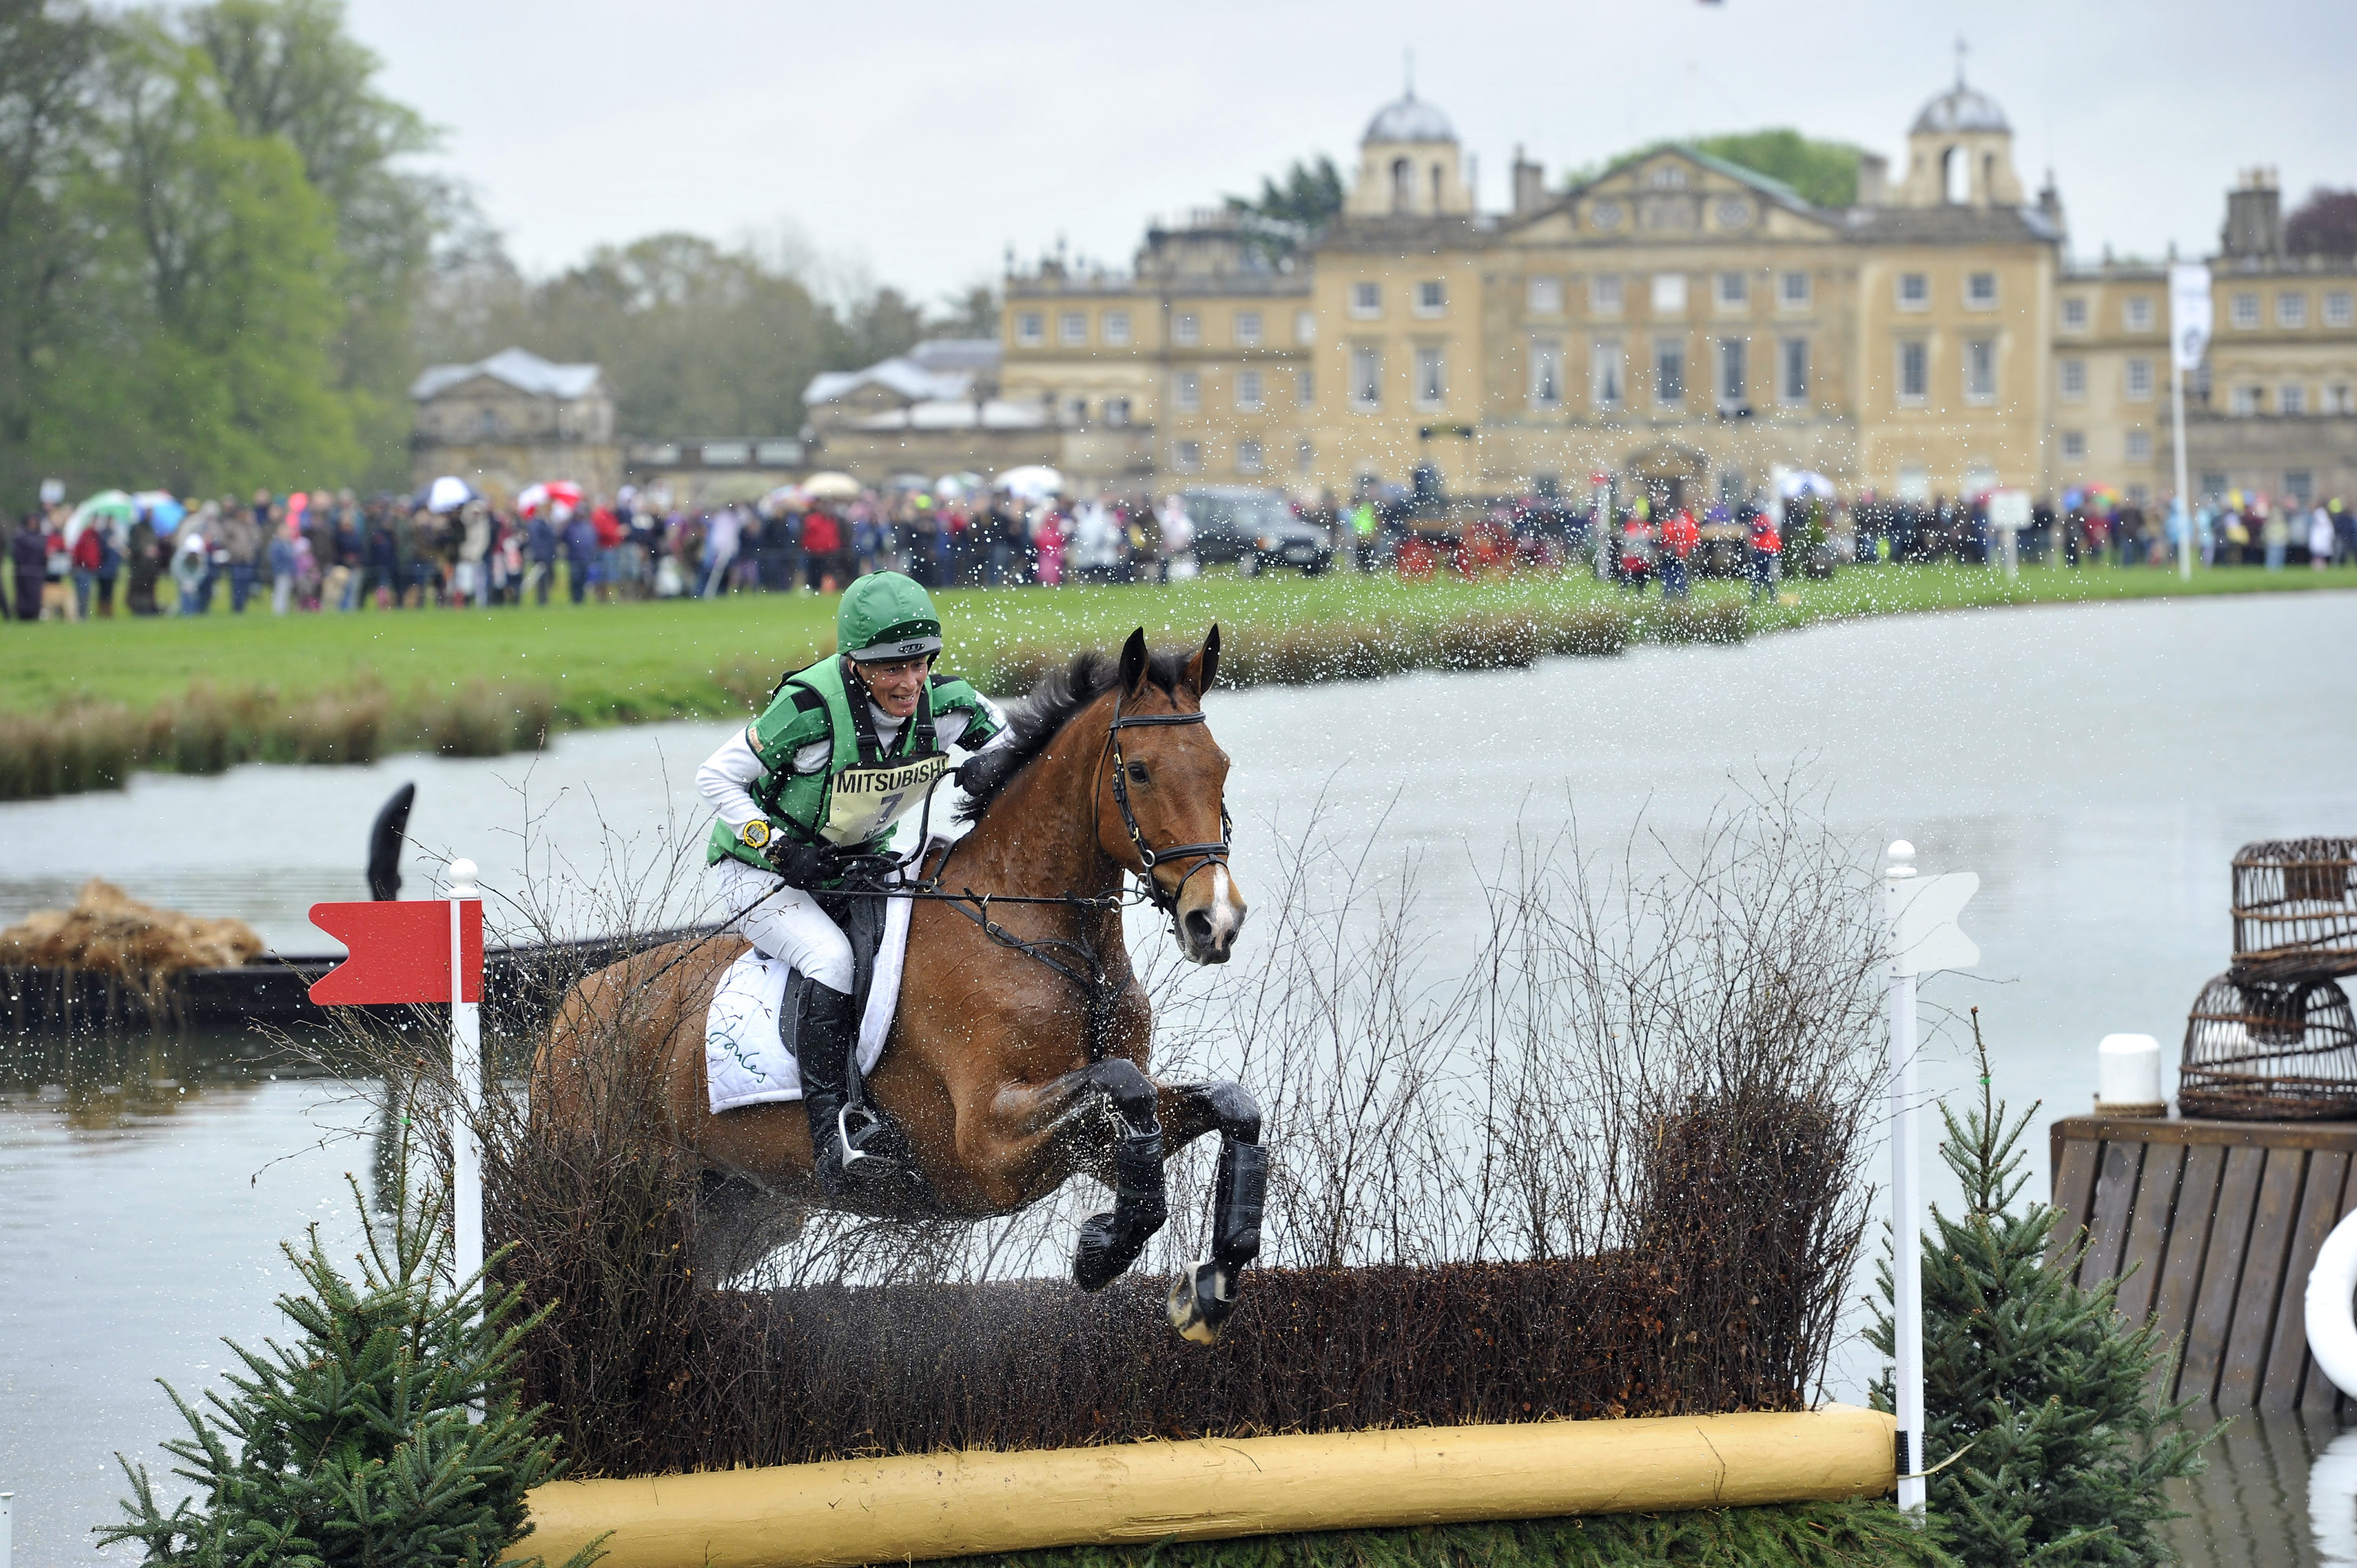 Incredible Cross Country Experience VIP Package for 4, to the Mitsubishi Badminton Horse Trials 2018